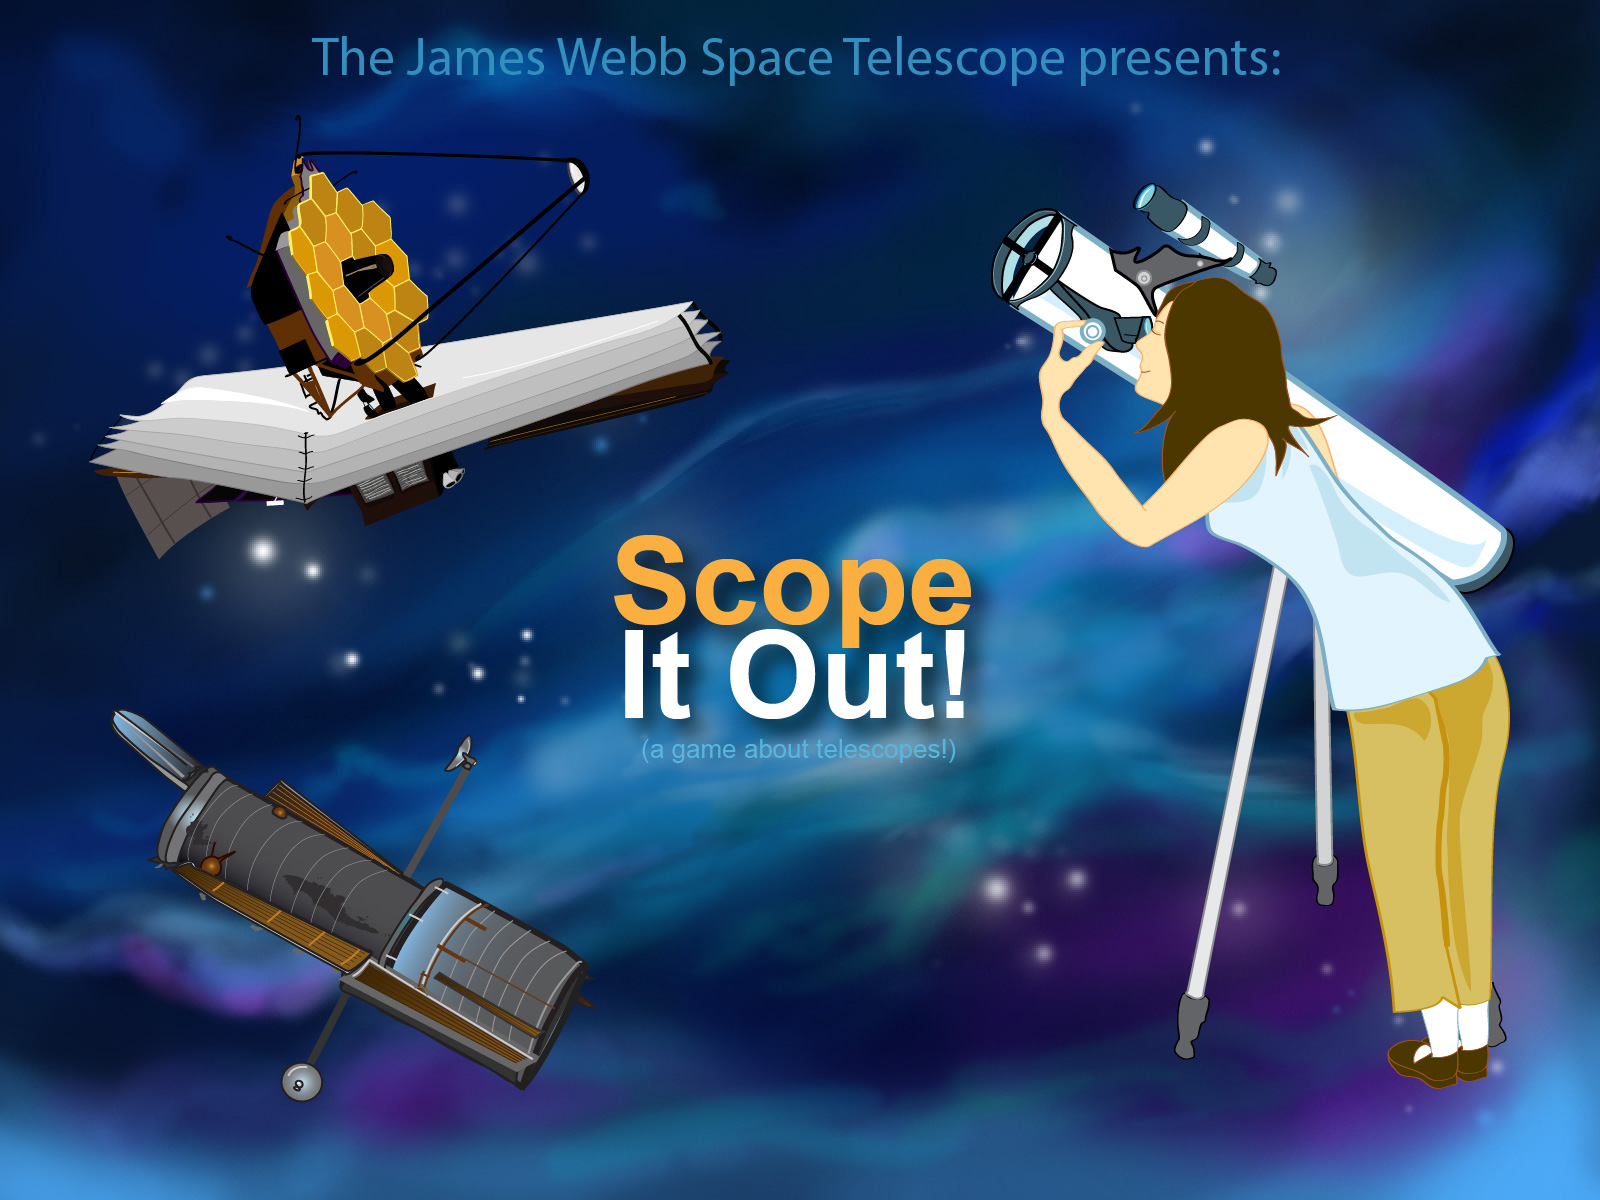 Title graphic for the Webb - scope it out game - telescope learning game which shows a blurry blue nebula like background image on which a woman looking through an optical telescope is shown on the right and an illustration of the Webb space telescope is shown upper left and Hubble Space Telescope lower left.